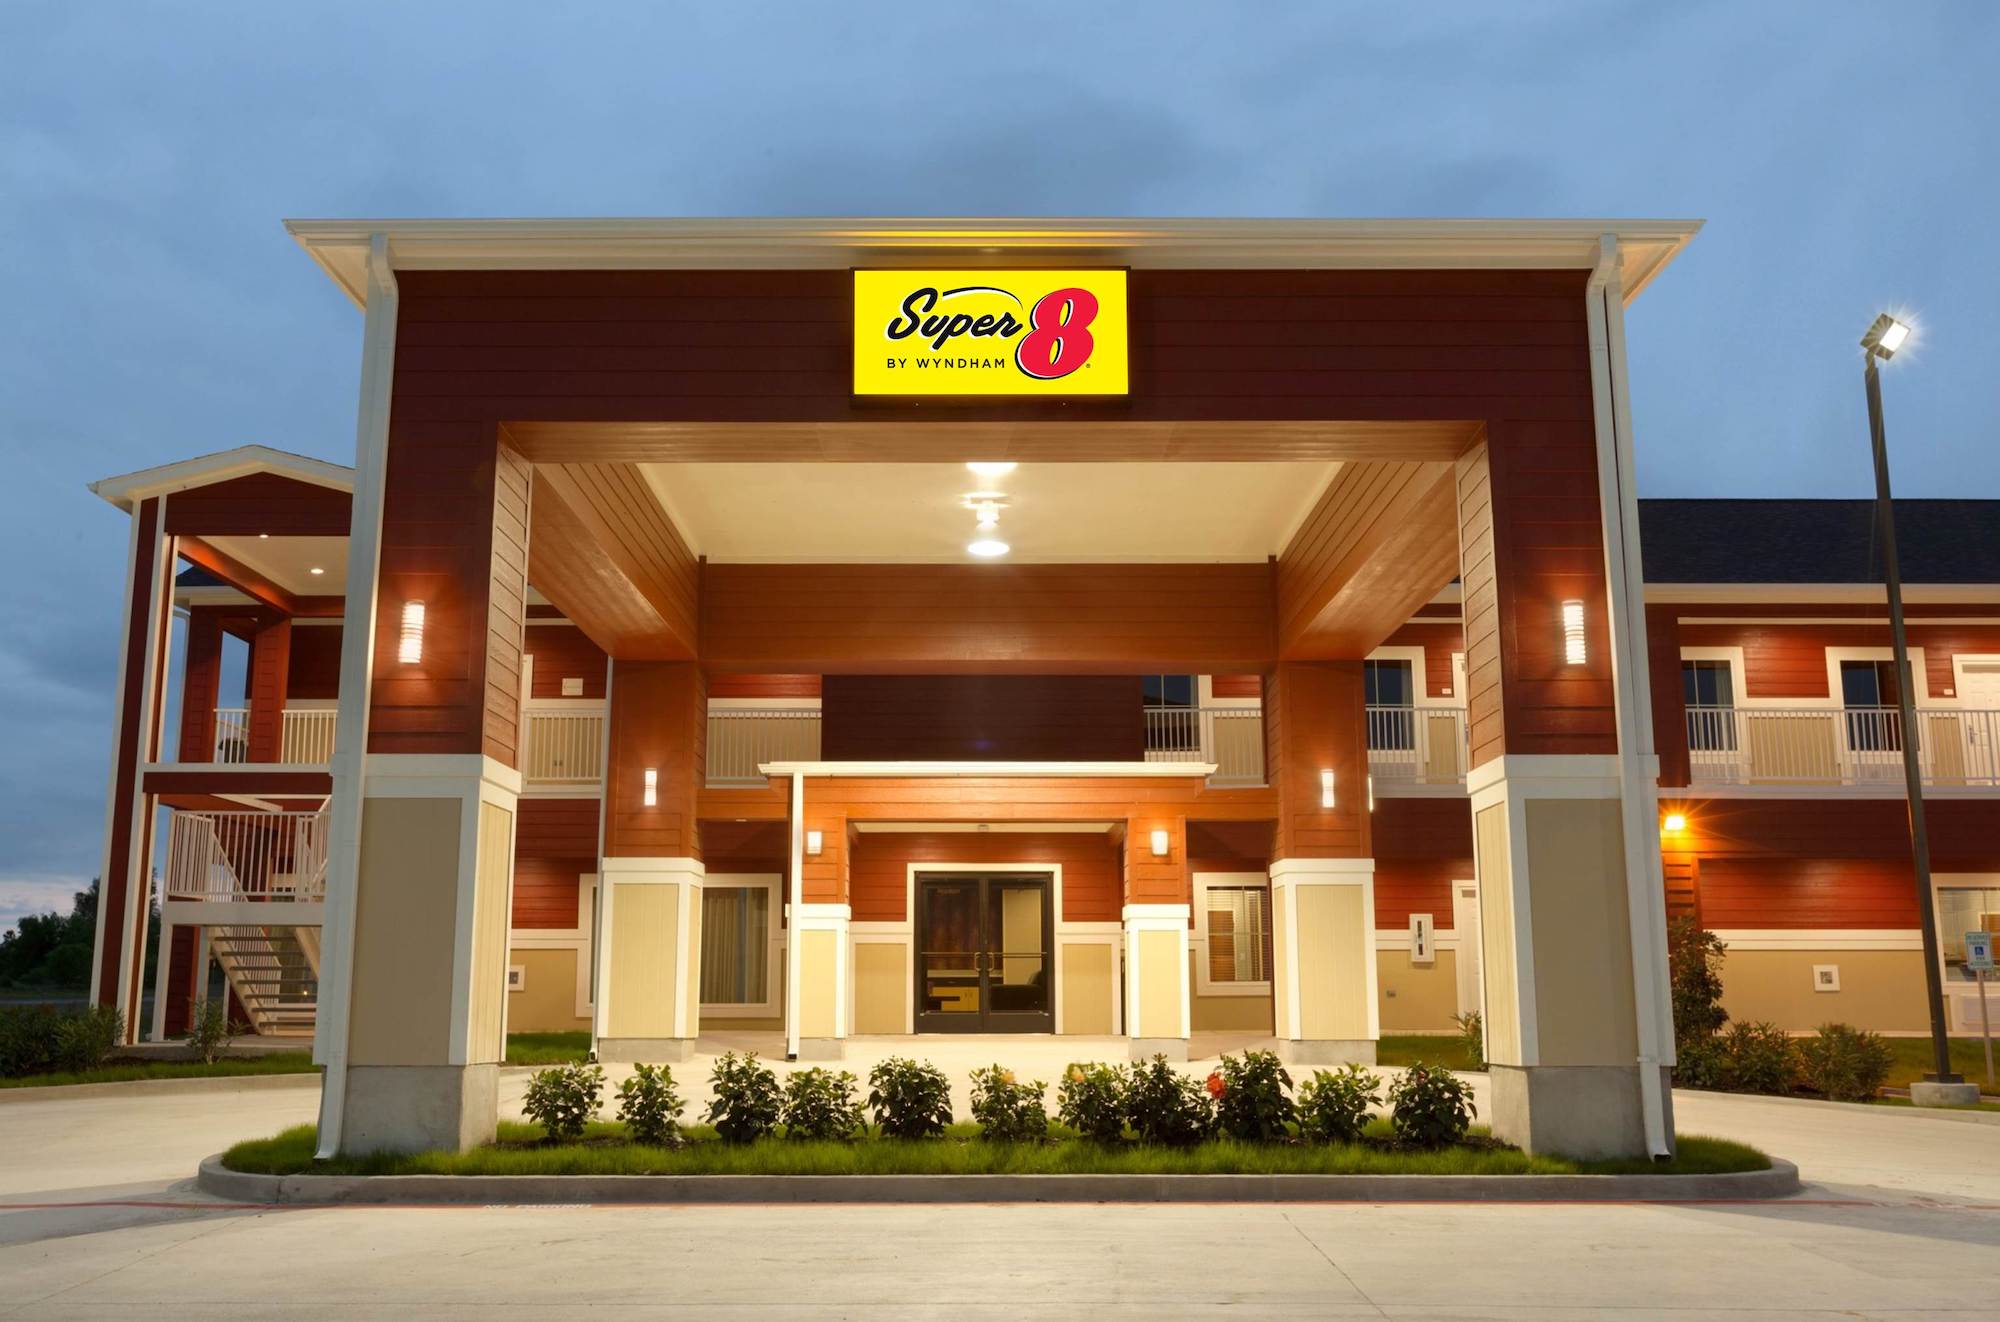 Super 8 by Wyndham - Carizzo Springs, TX - Exterior